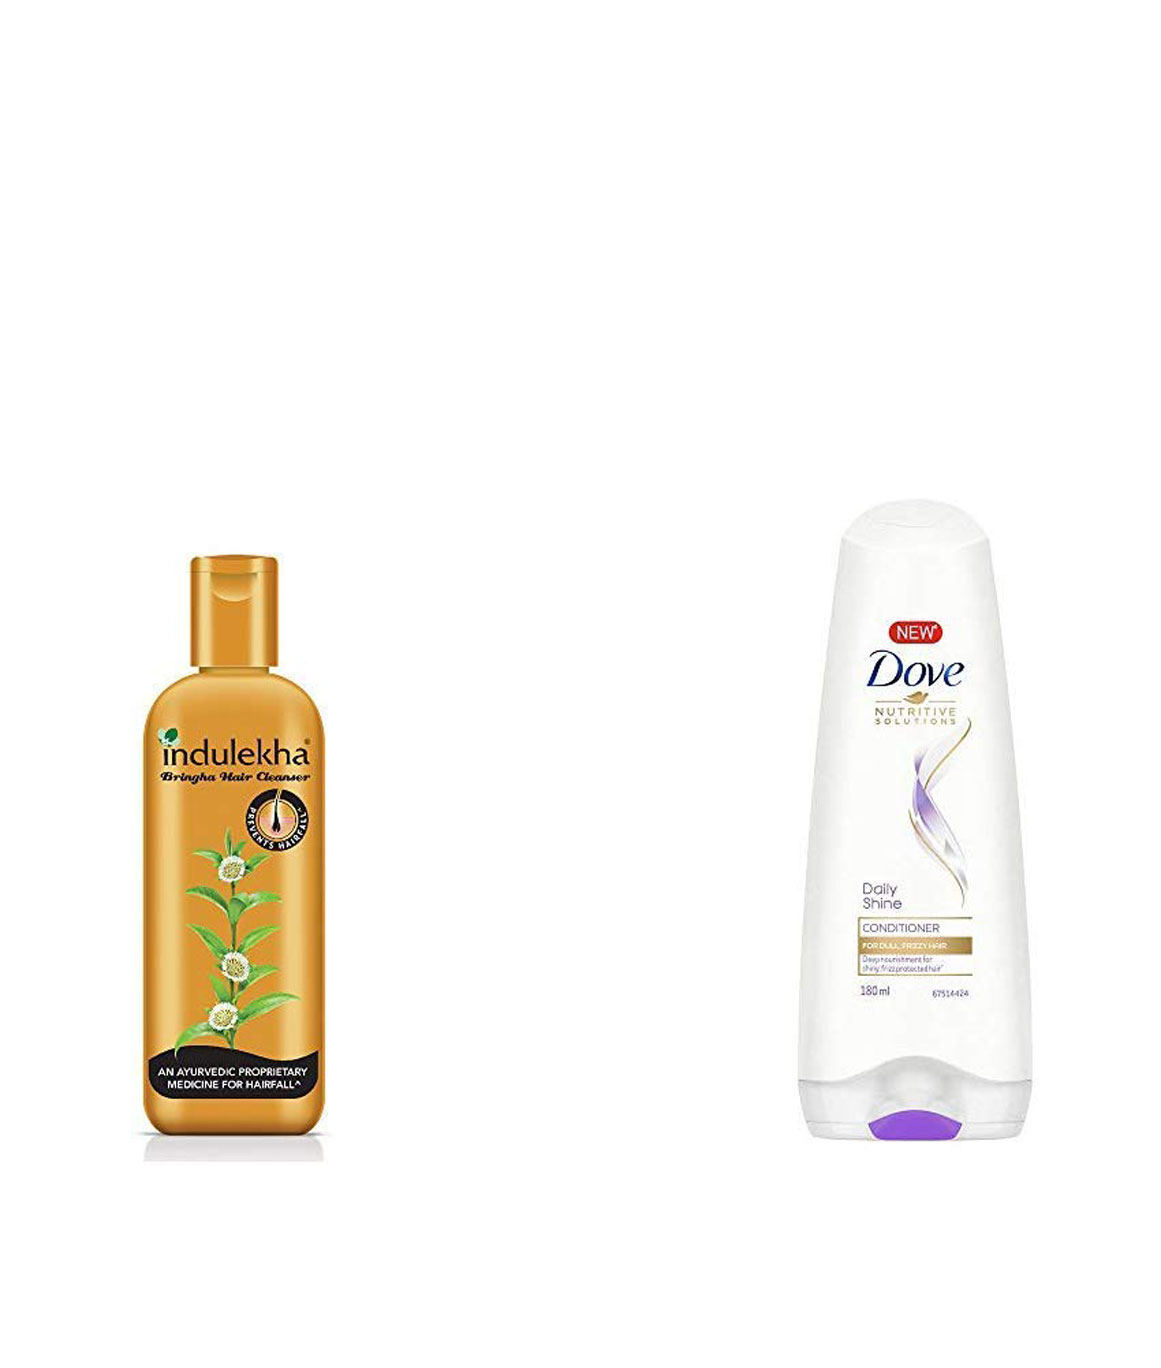 Indulekha Shampoo Review  Things you need to know